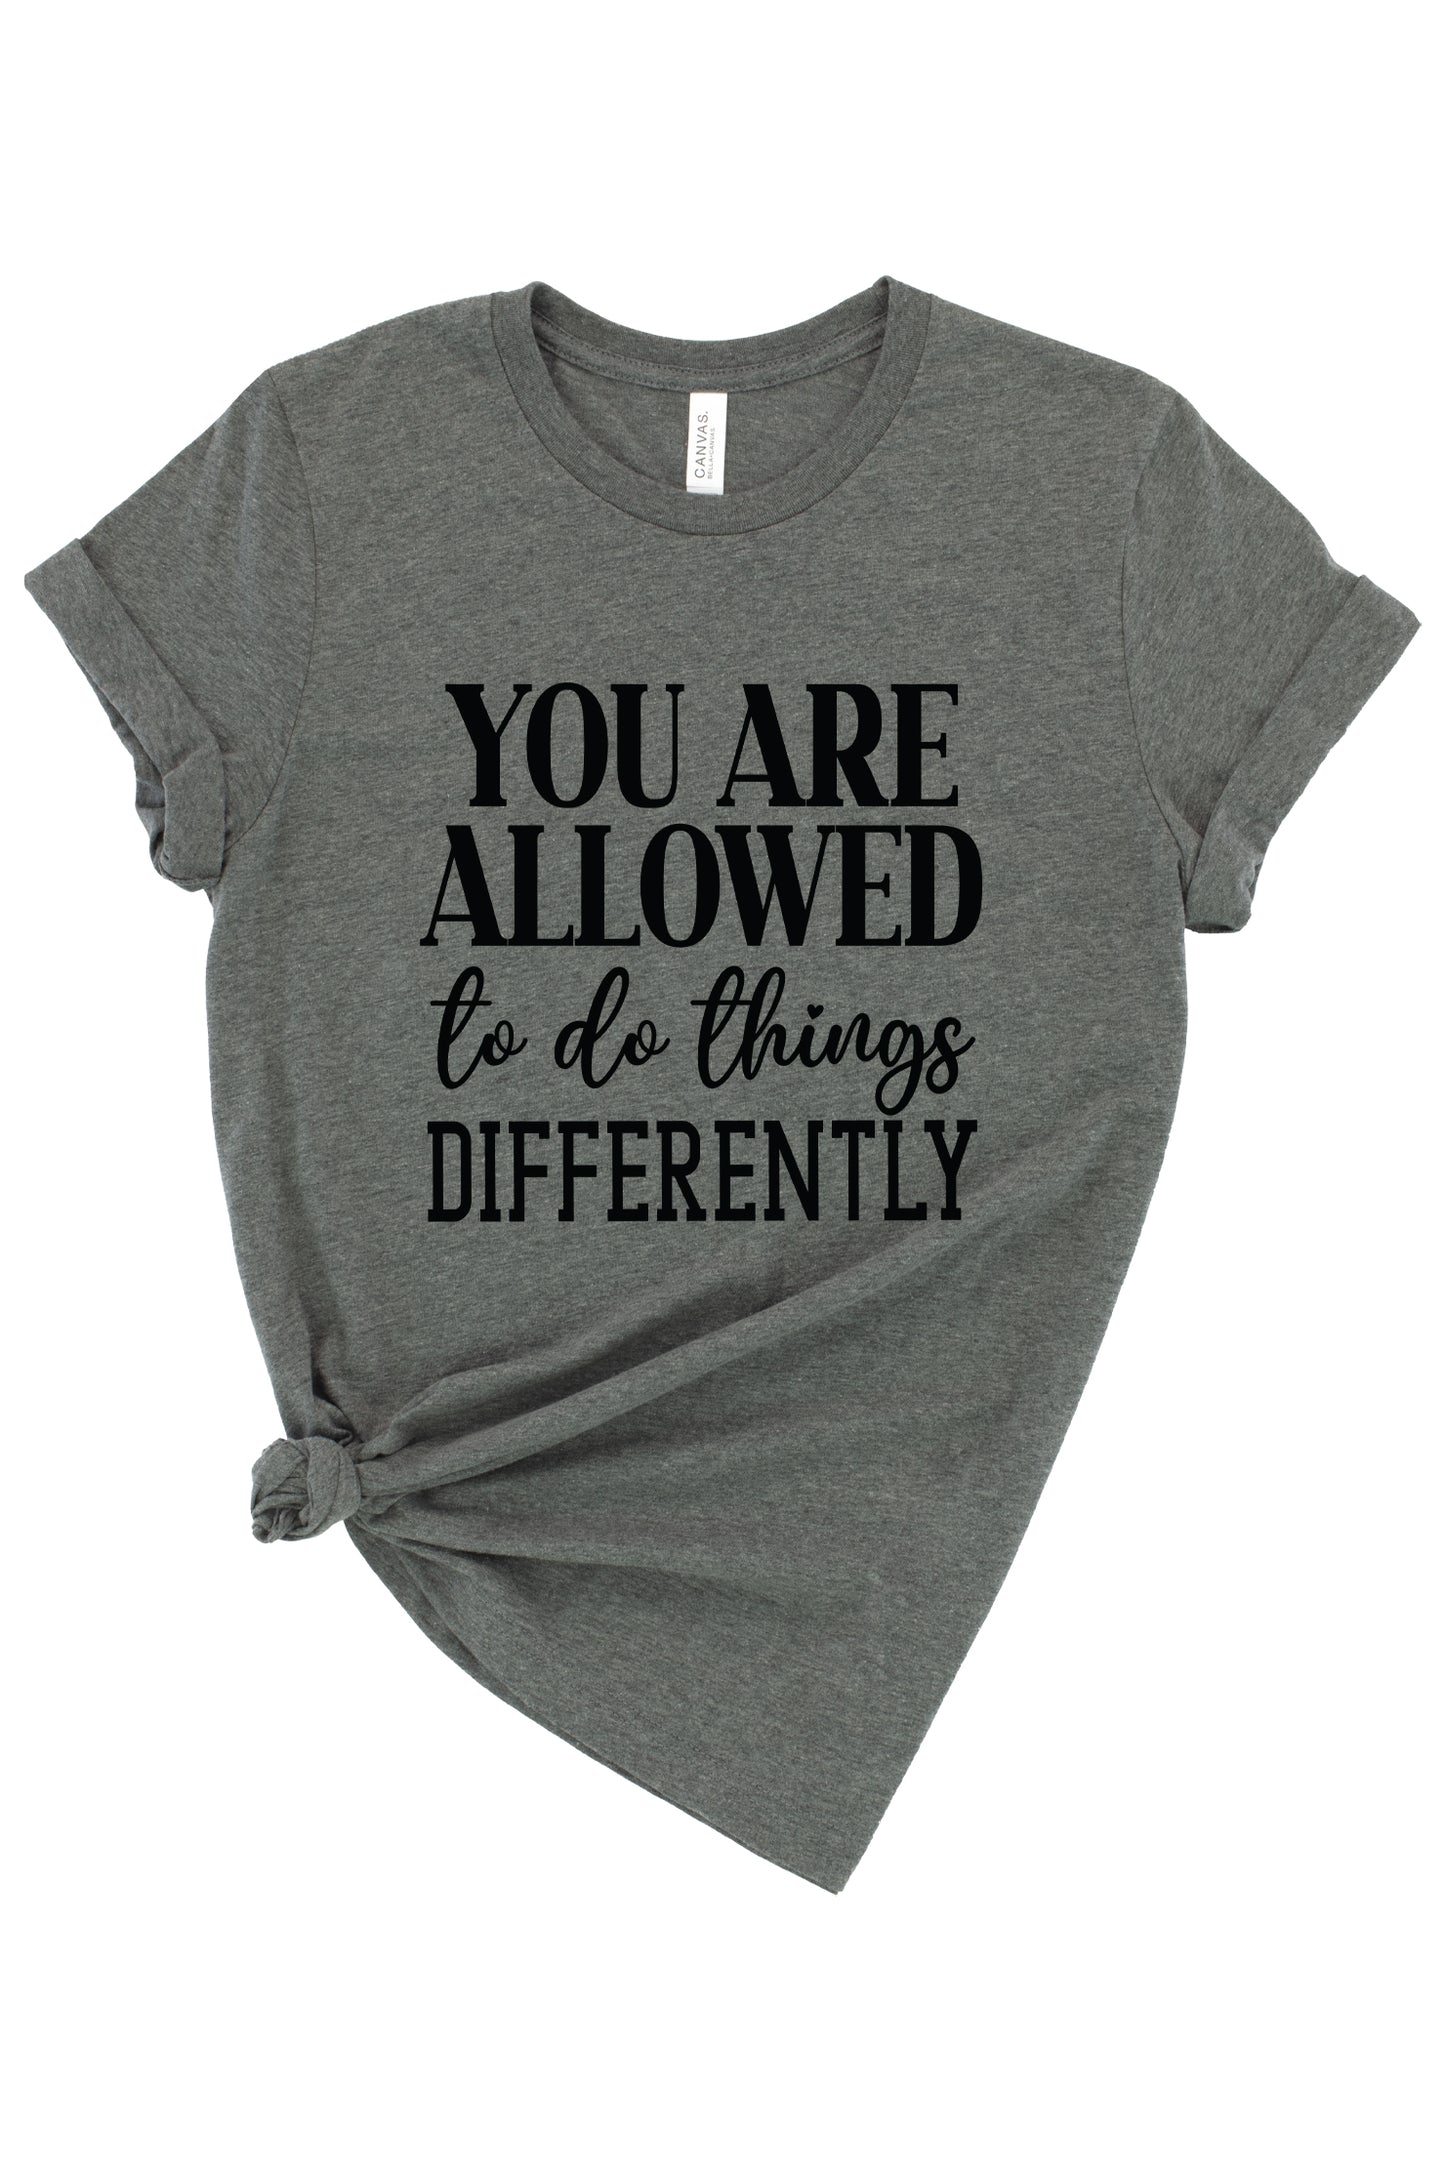 You Are Allowed To Do Things Differently Graphic Tee